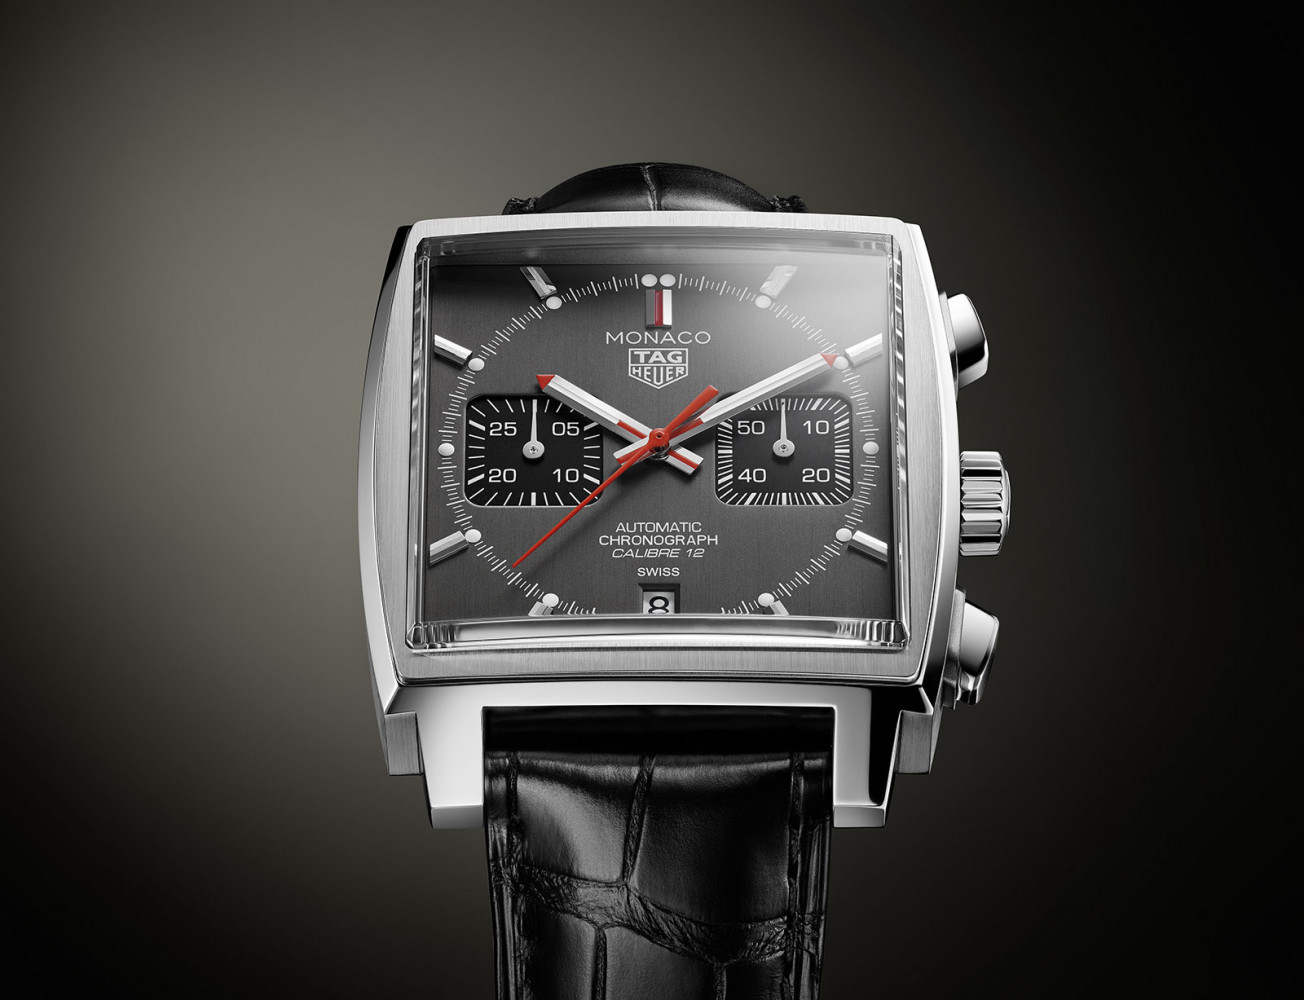 Tag Heuer Watches for sale in Louisville, Kentucky